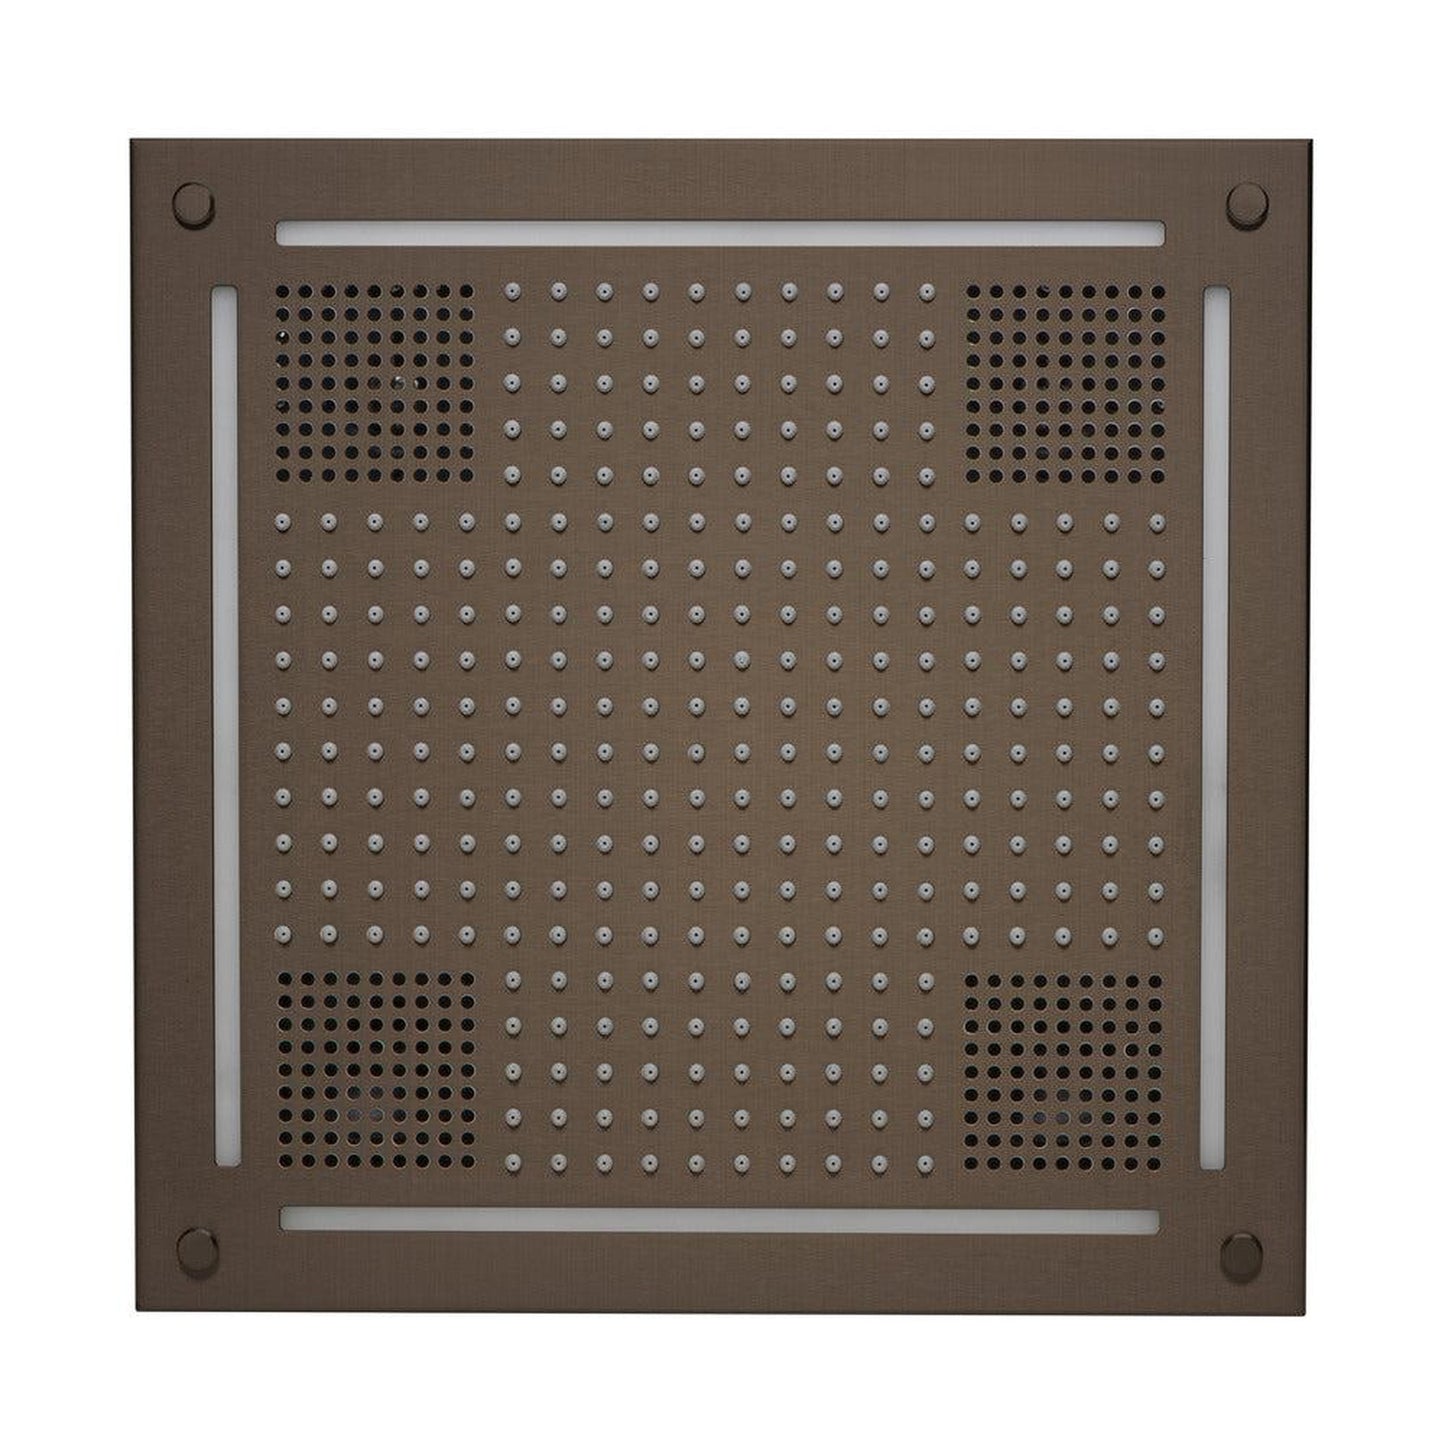 ThermaSol 18" x 18" Oil Rubbed Bronze Finish Hydrovive Light, Sound and Rain System